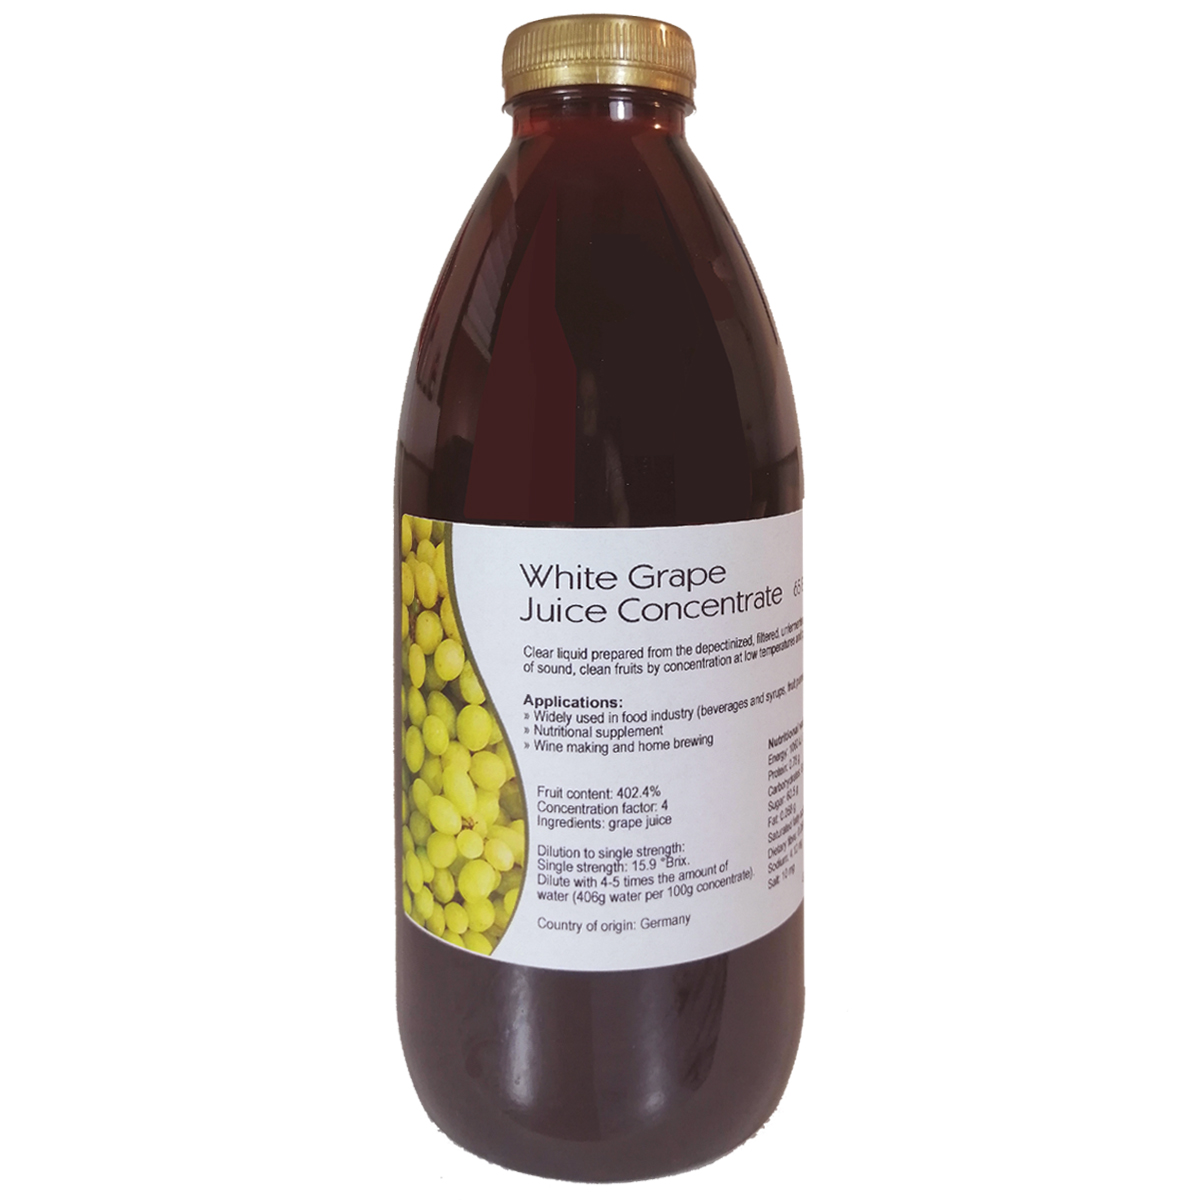 White grape juice concentrated 1 litre